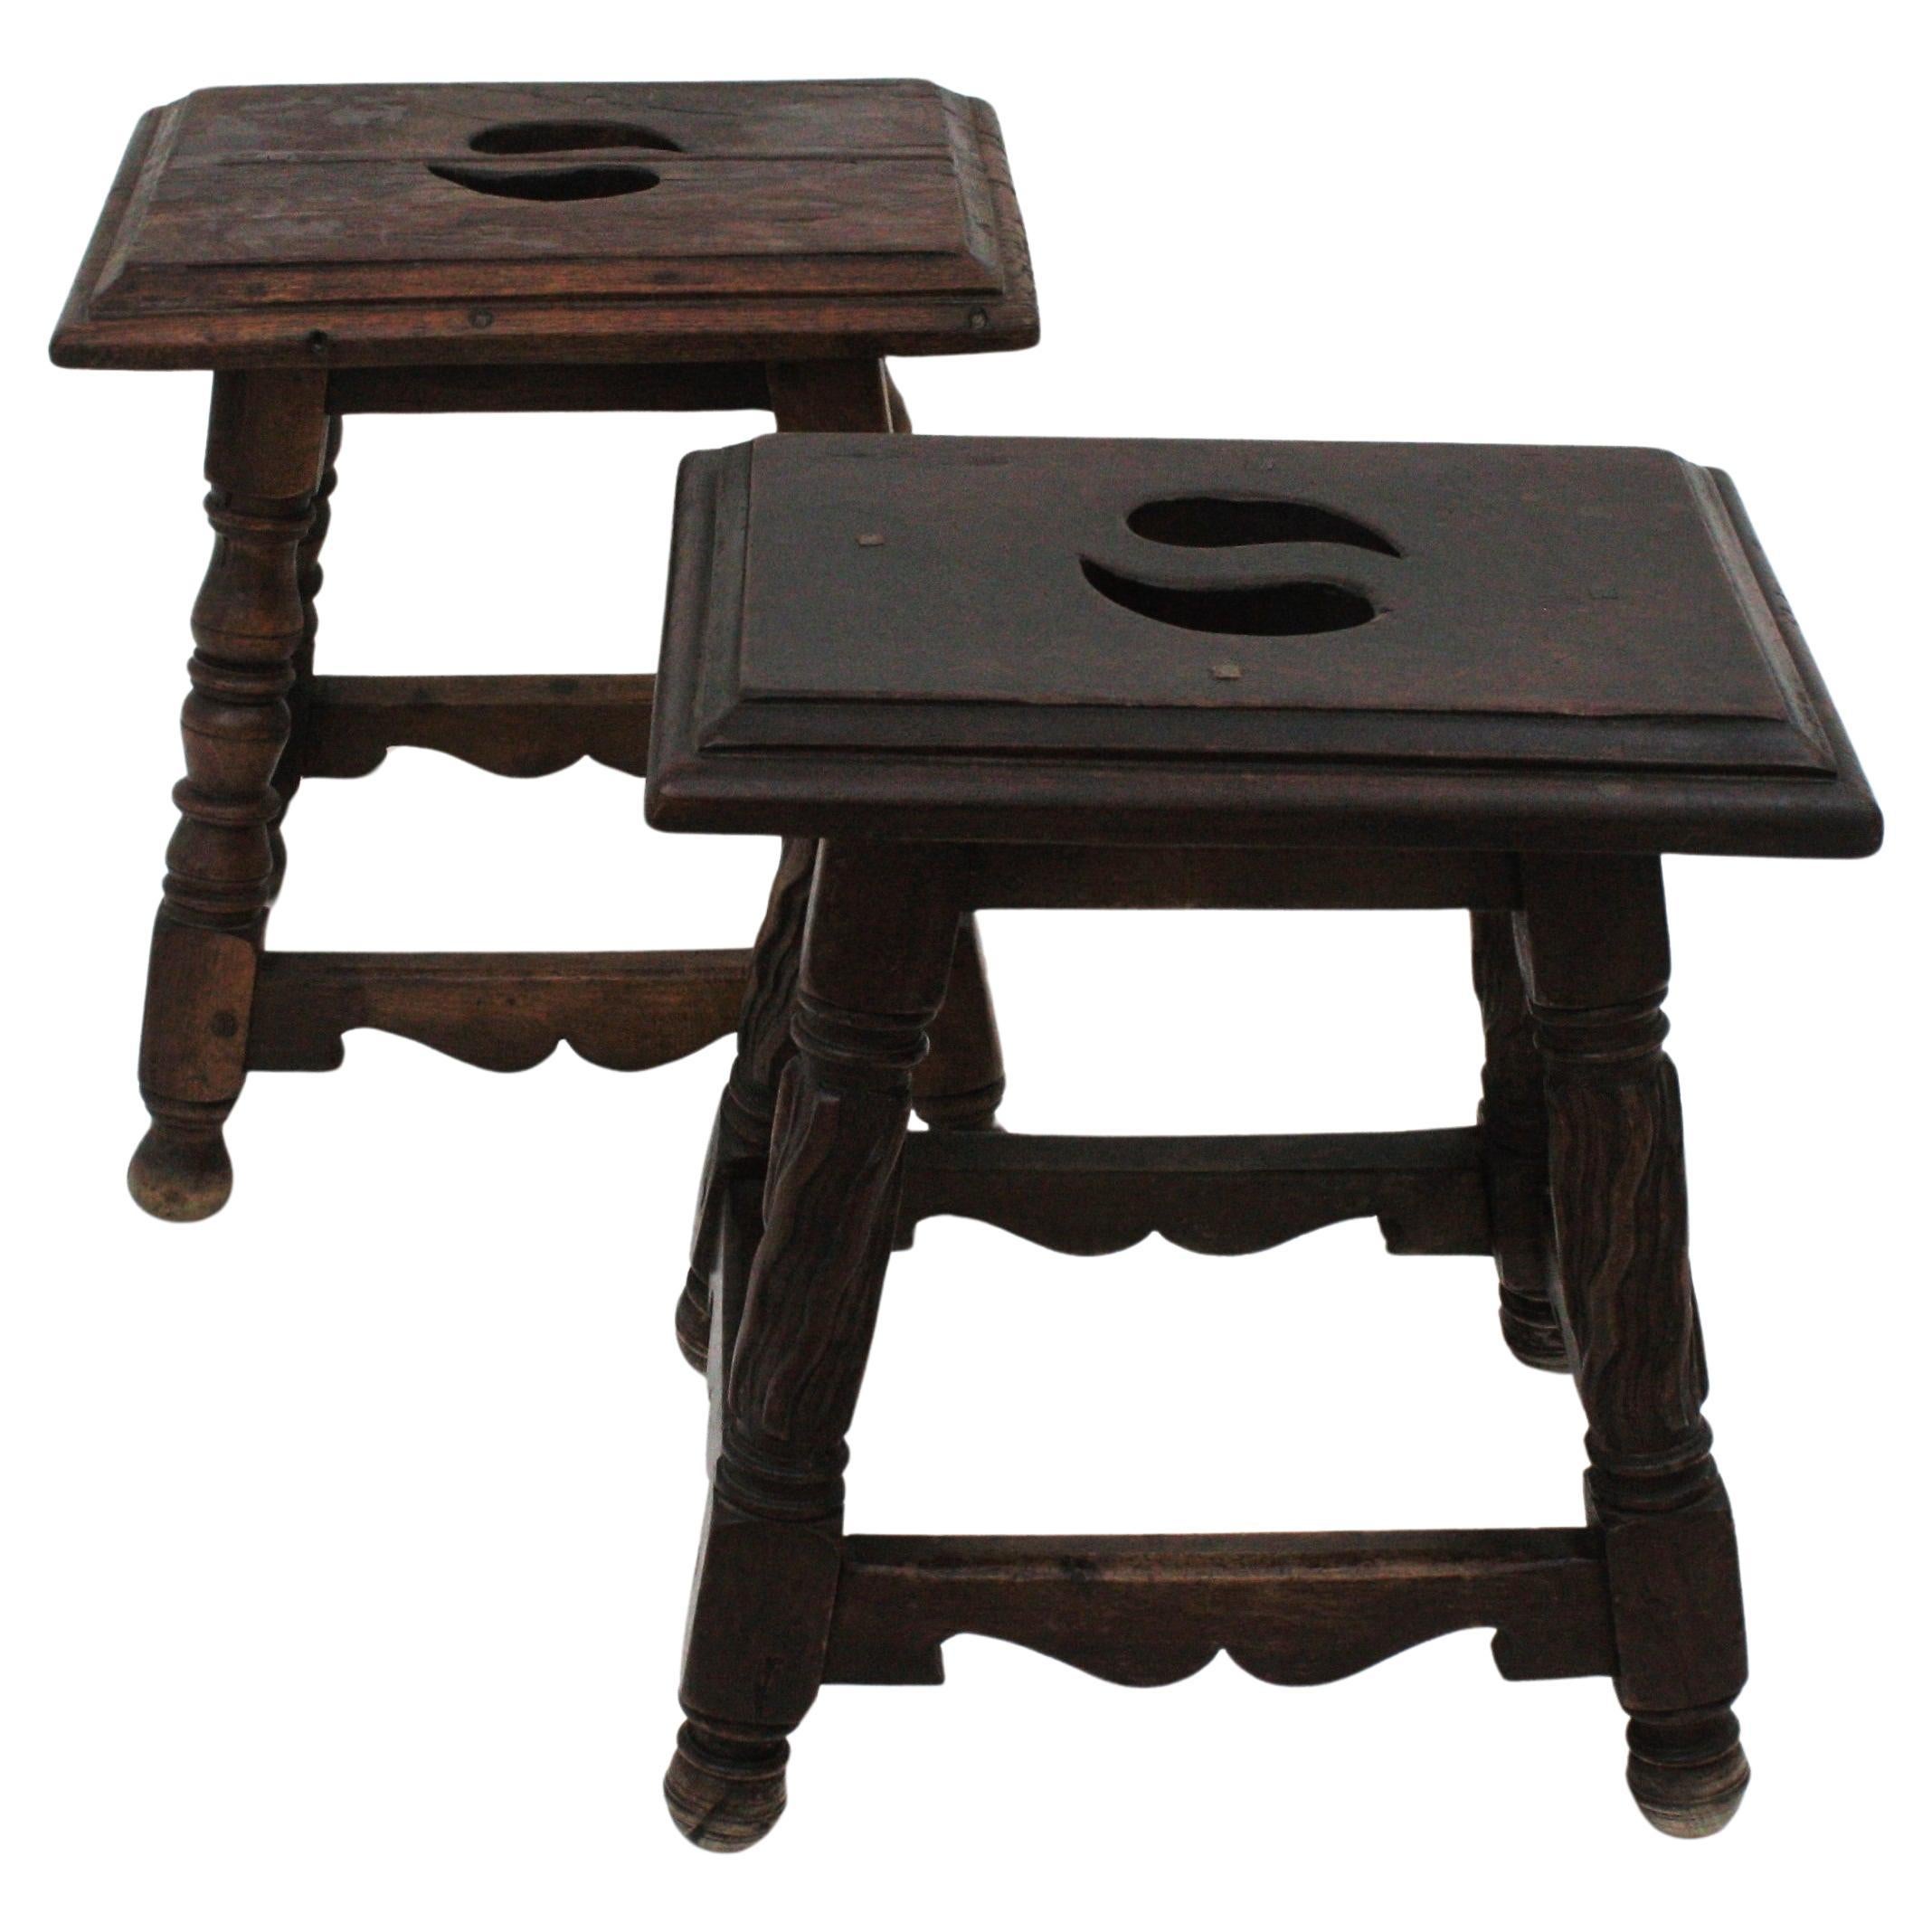 Pair of Spanish Colonial Side Tables / Stools in Carved Wood, 1940s For Sale 15